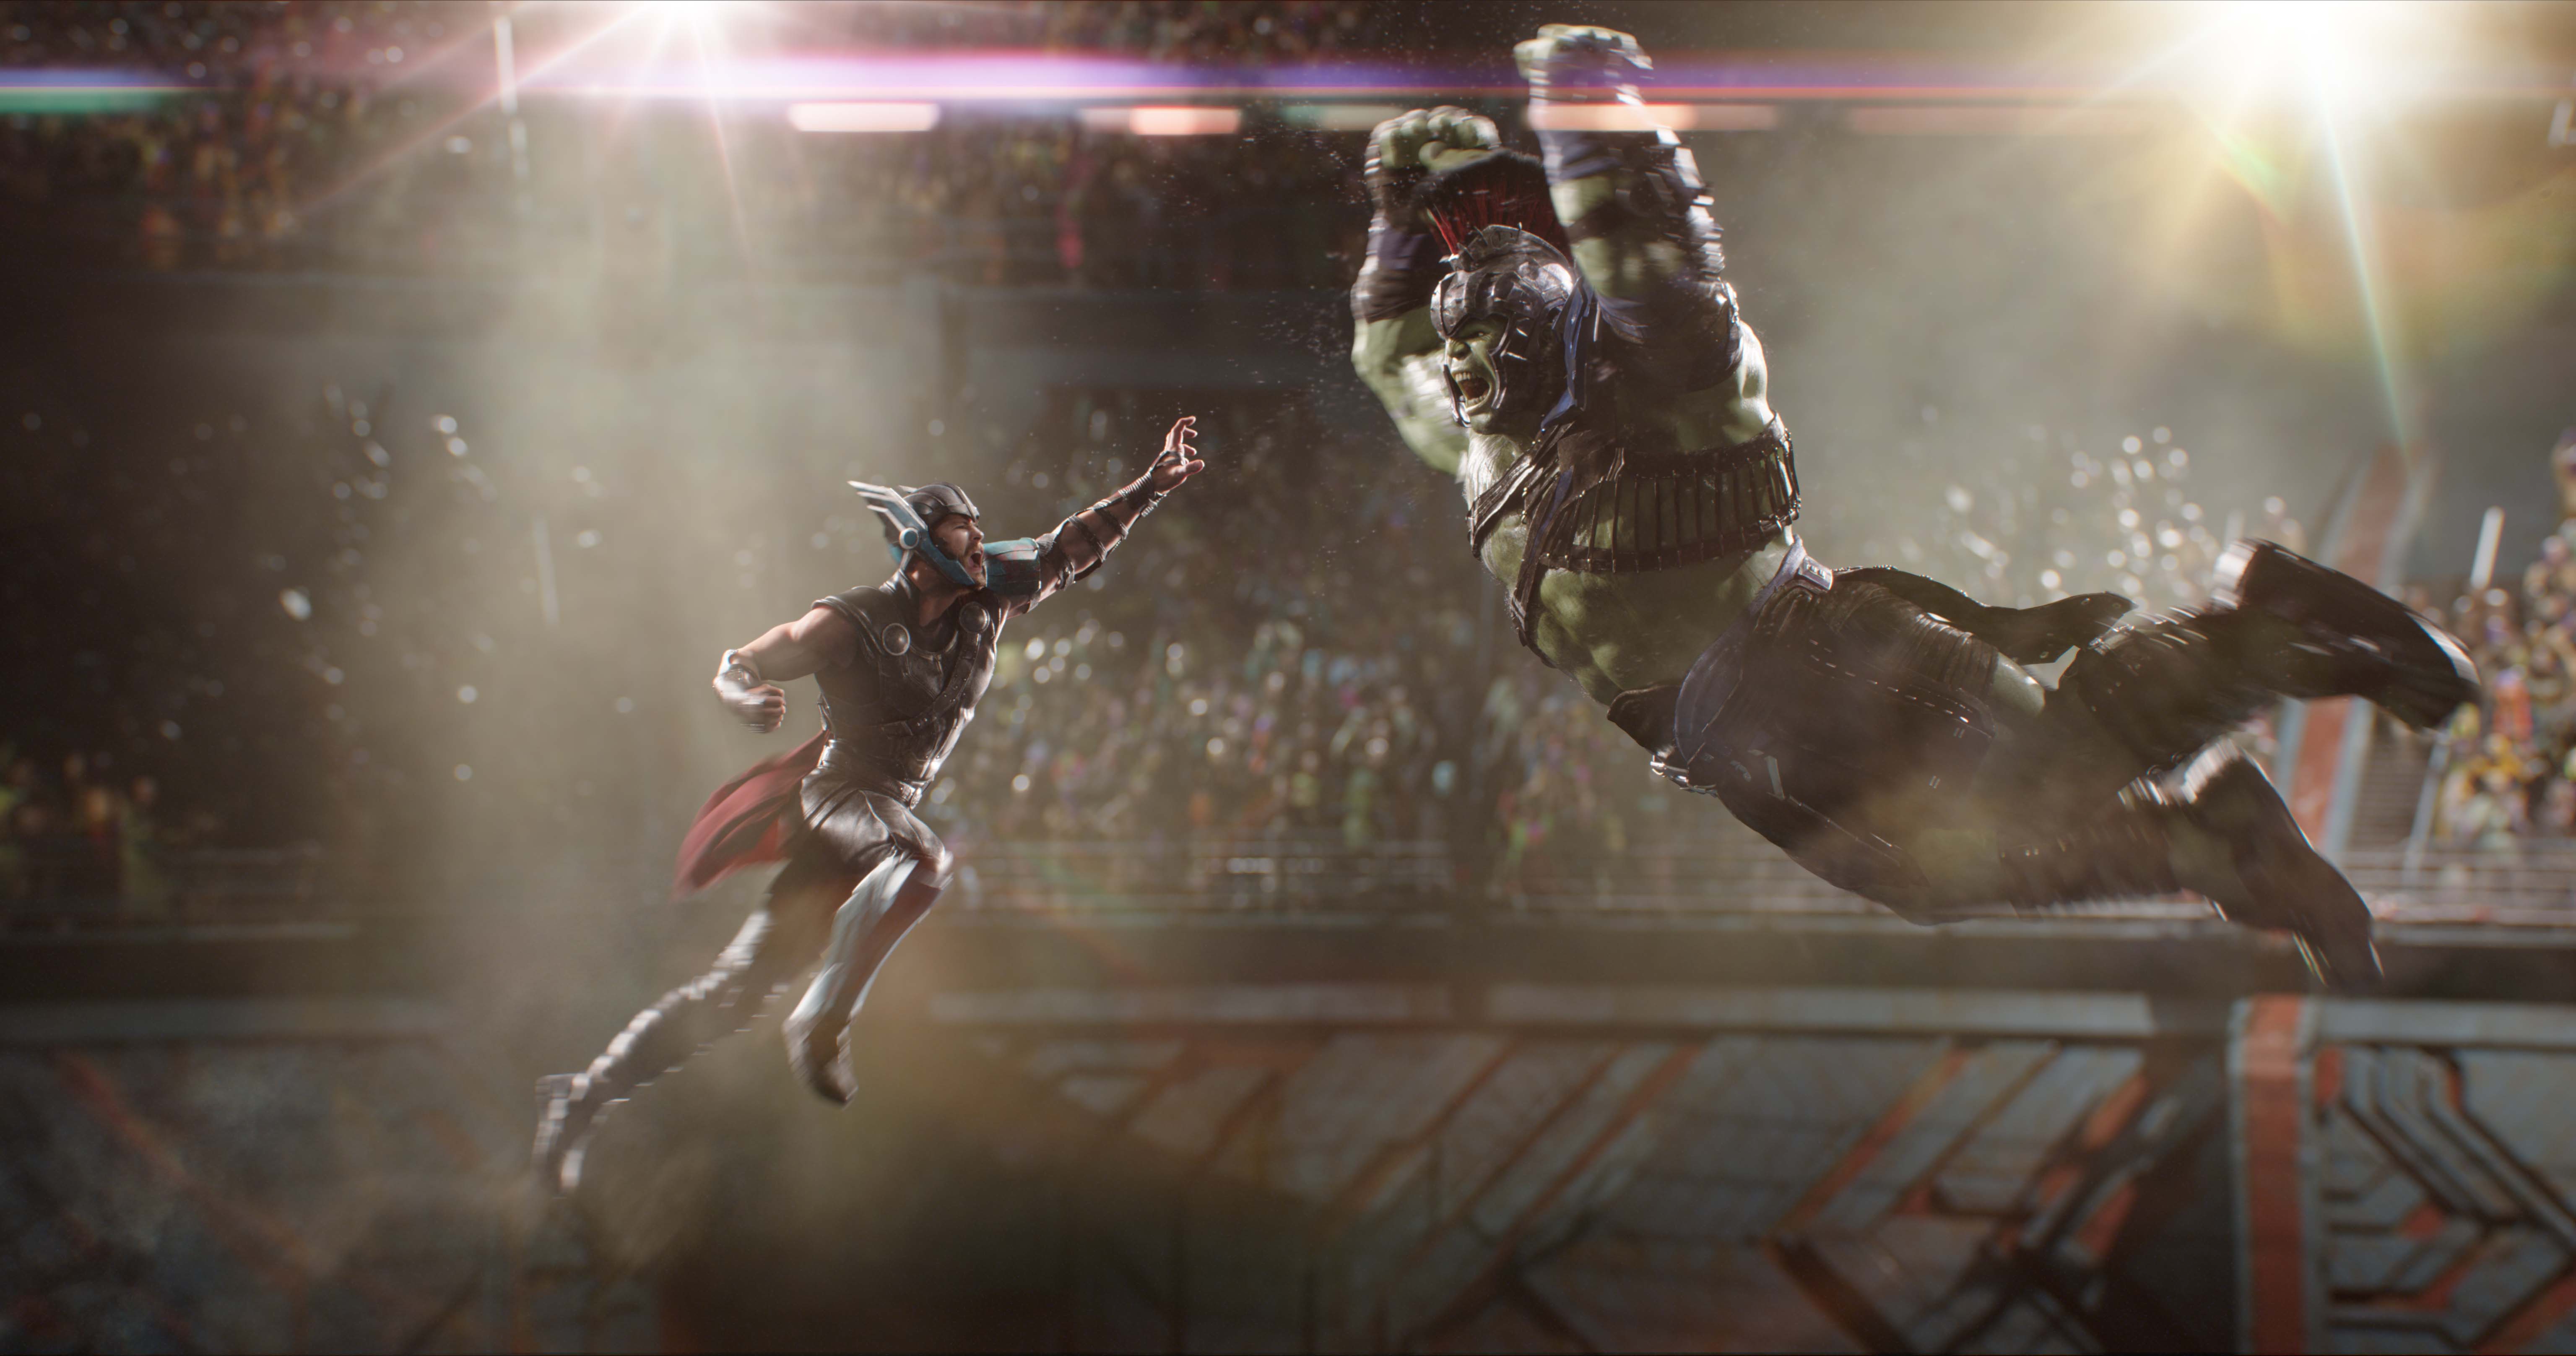 Thor and Hulk jump into the air to smash each other in Thor: Ragnarok